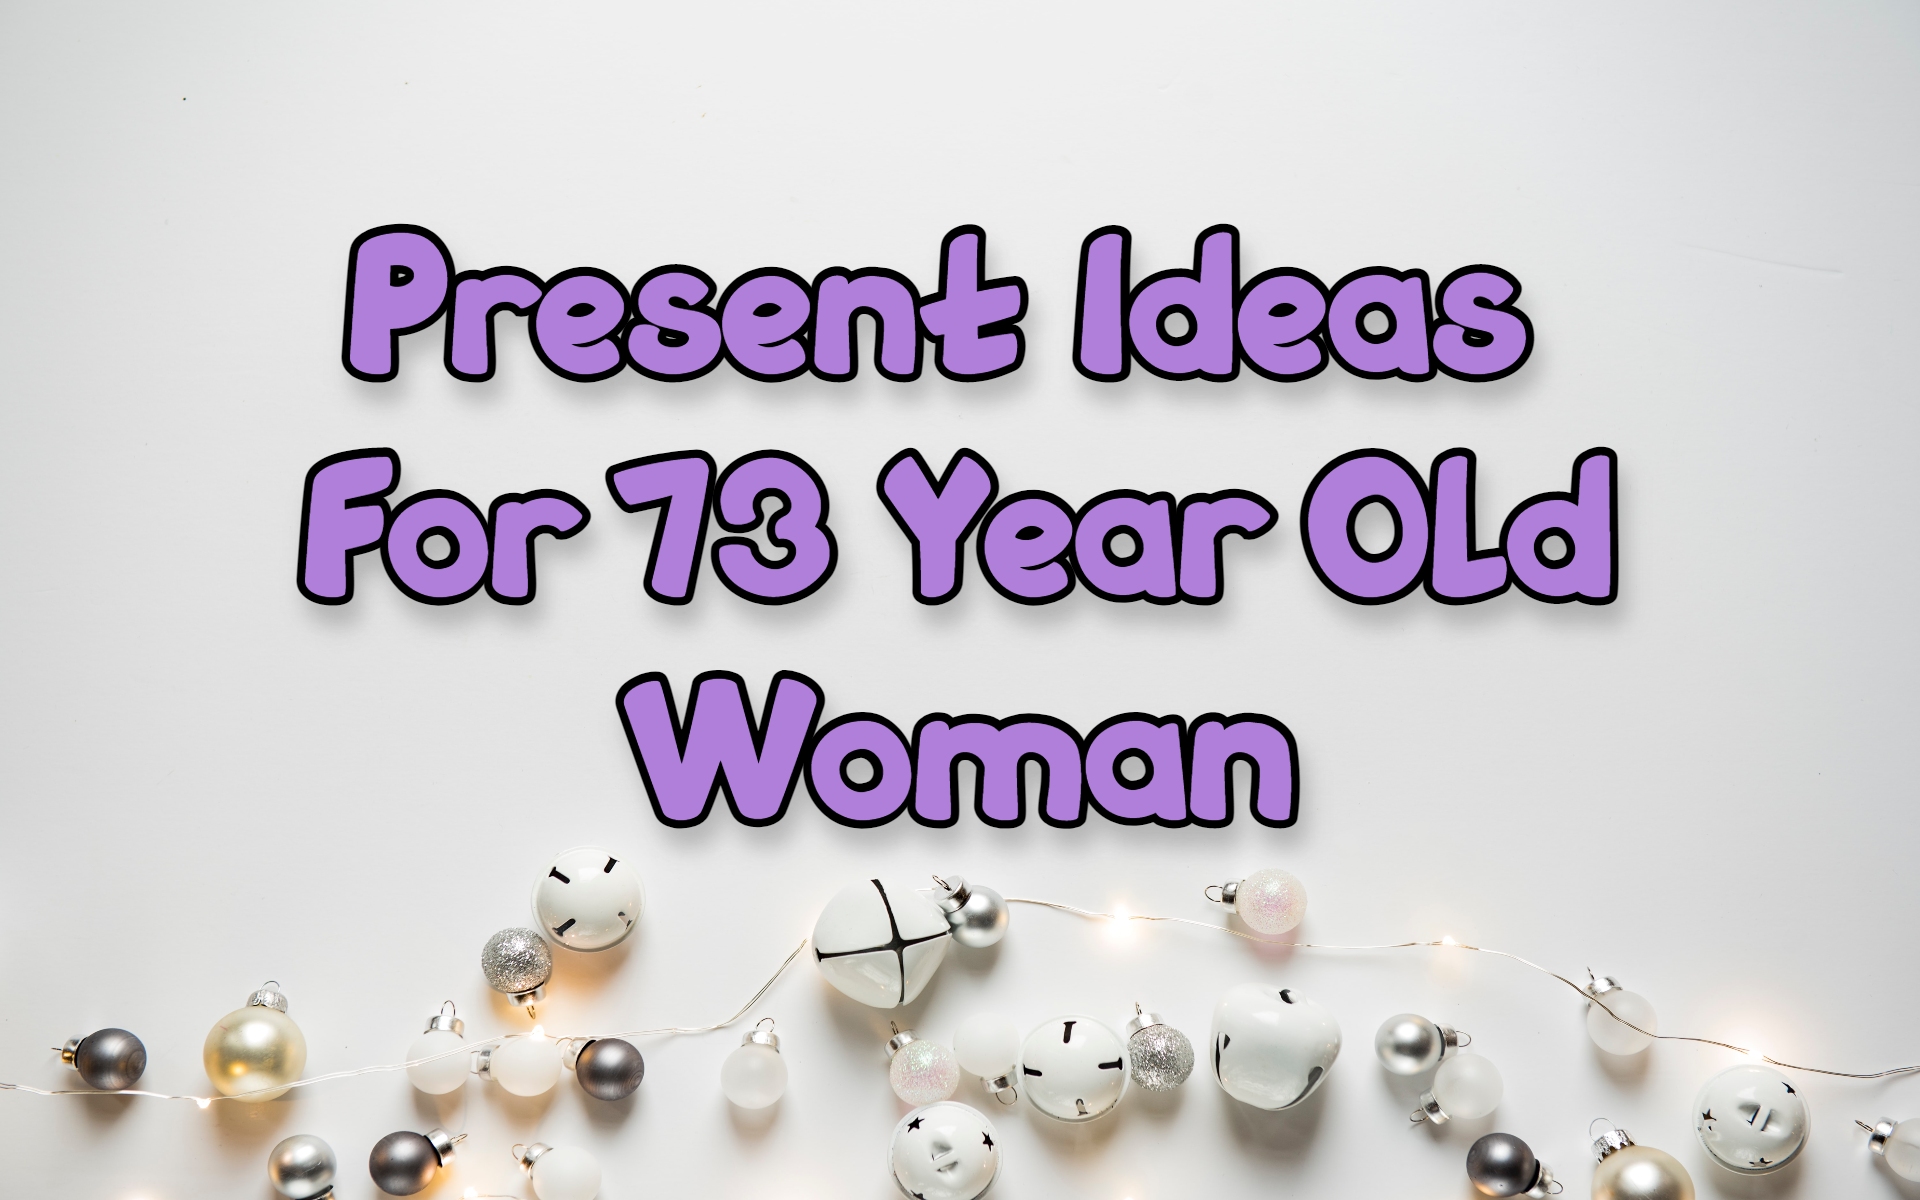 Cover image of gift ideas for 73-year-old woman by Giftsedge